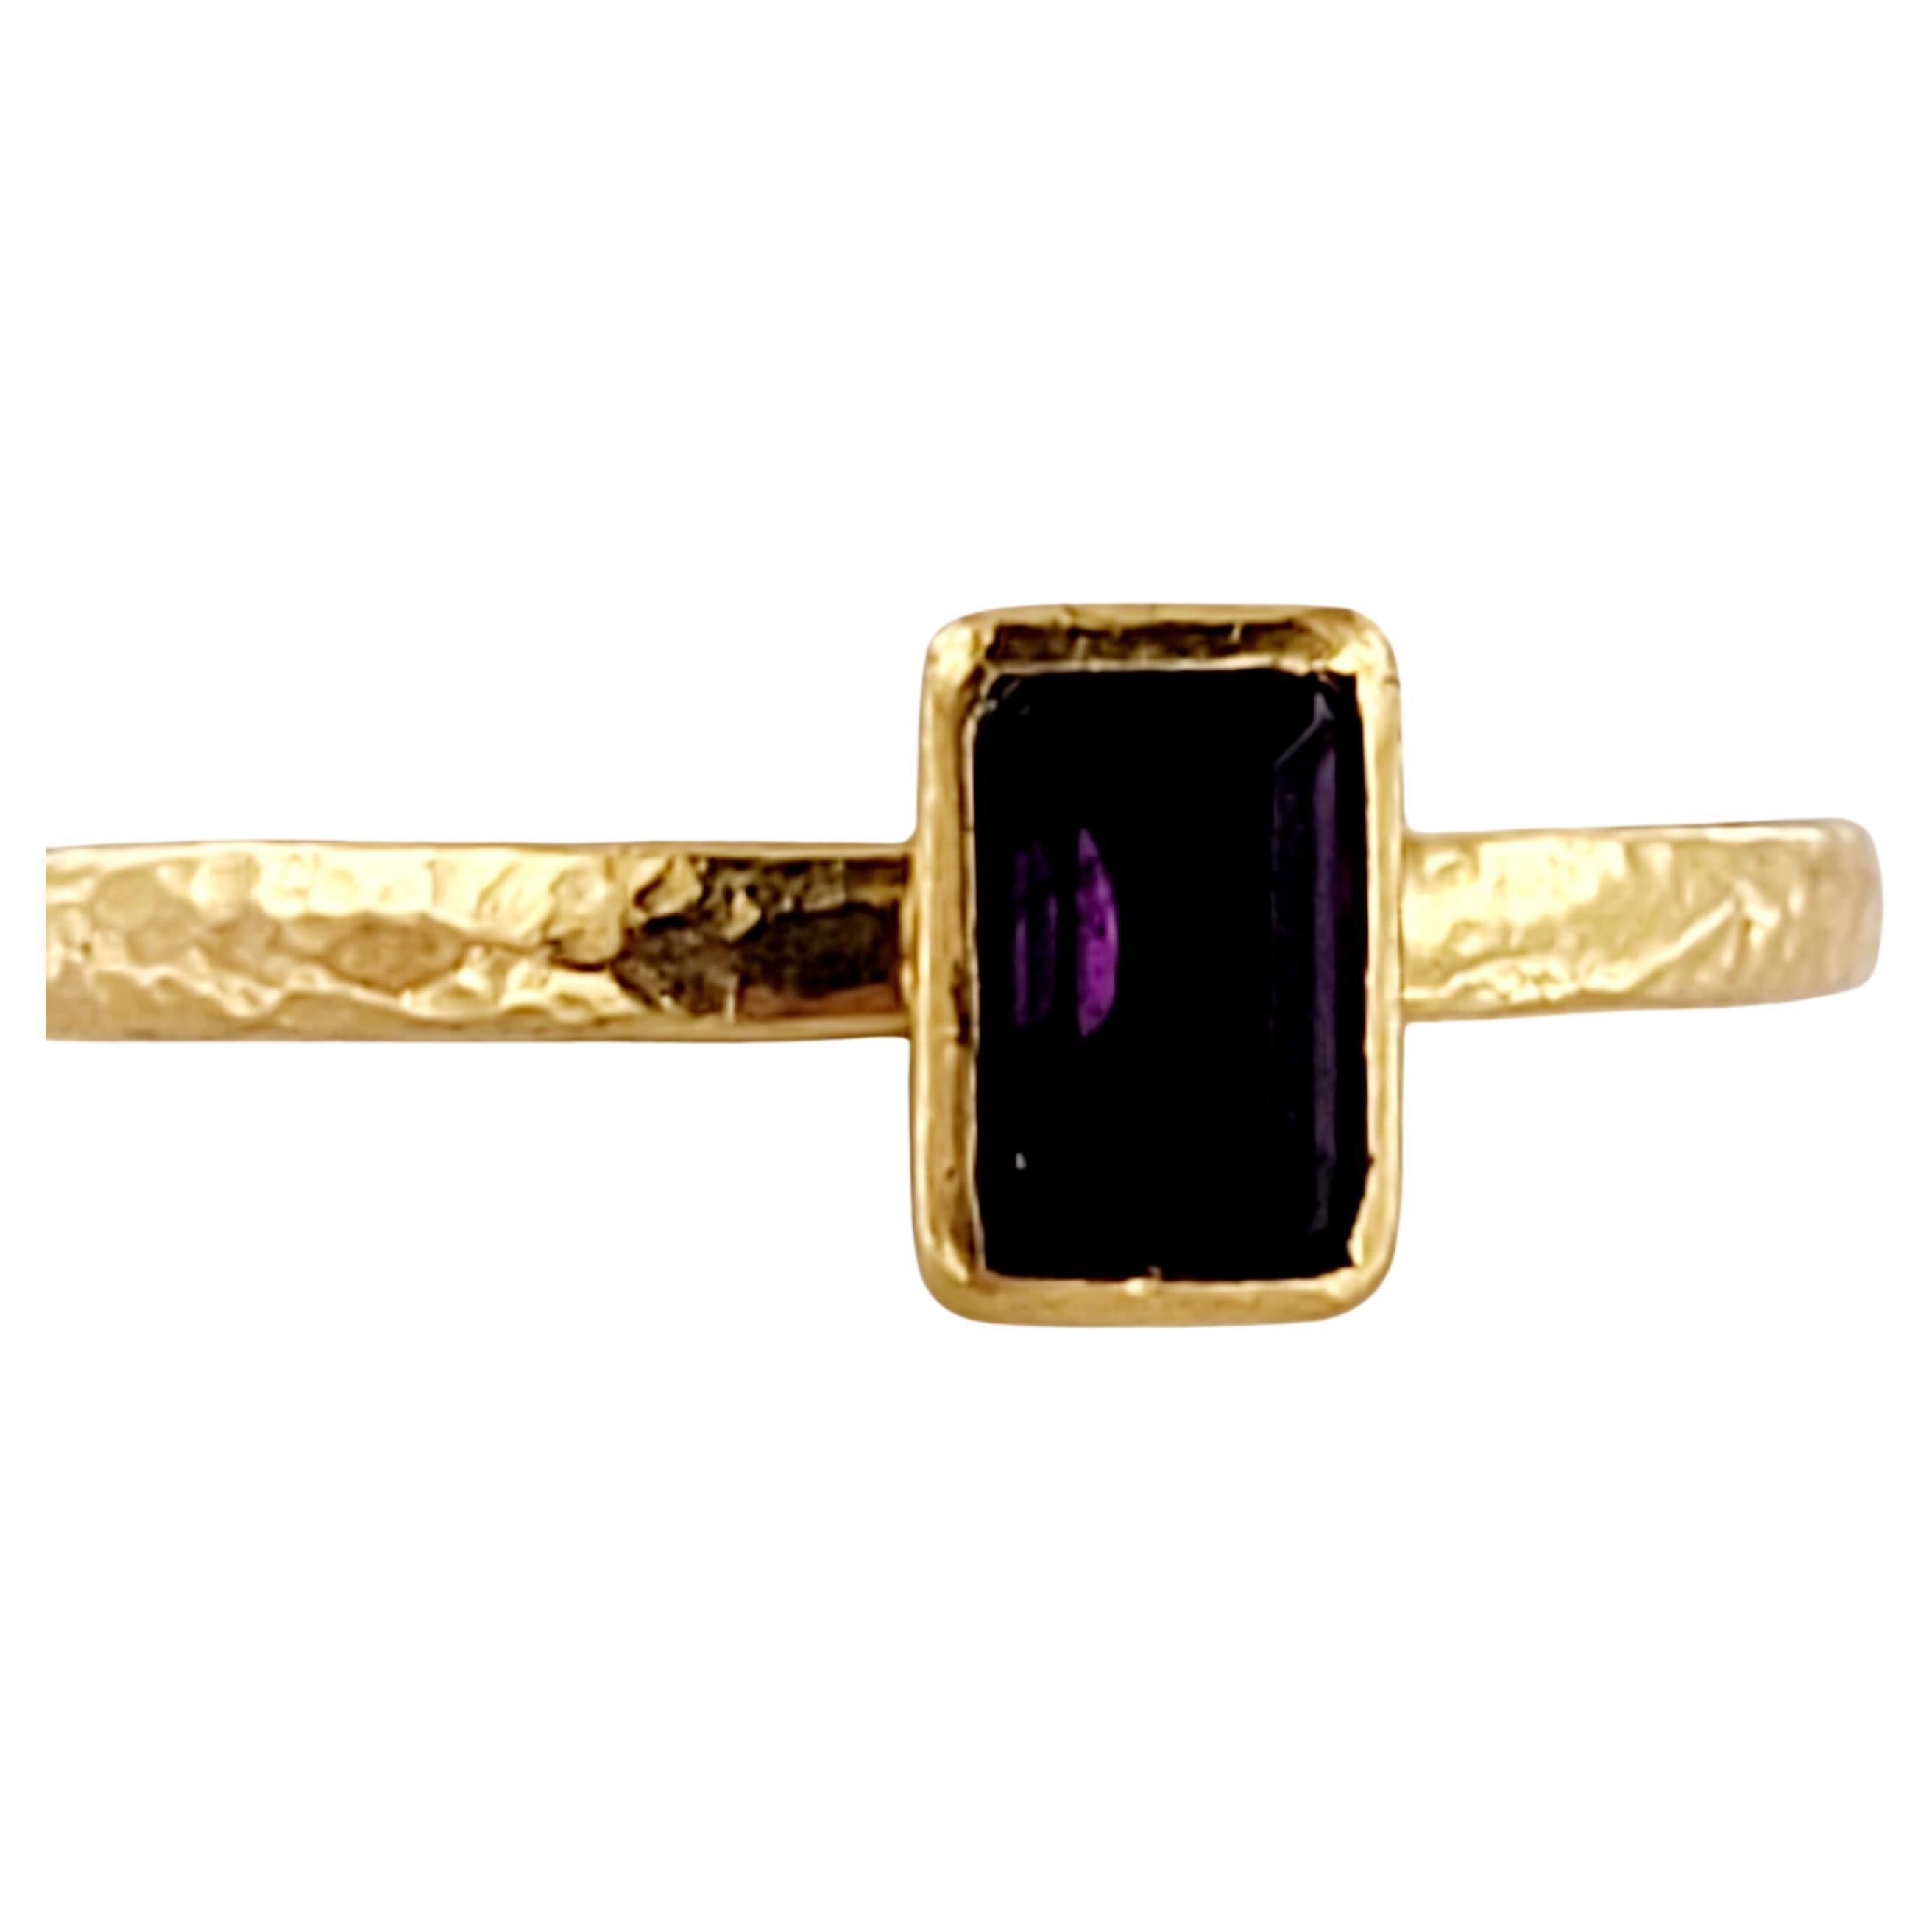 Brand Gurhan  
Type Ring
Material 24K Yellow Gold
Center Stone Amethyst 
Amethyst Stone 0.55ct
Stone Emerald cut
Ring Size 6.25
Condition New, never worn